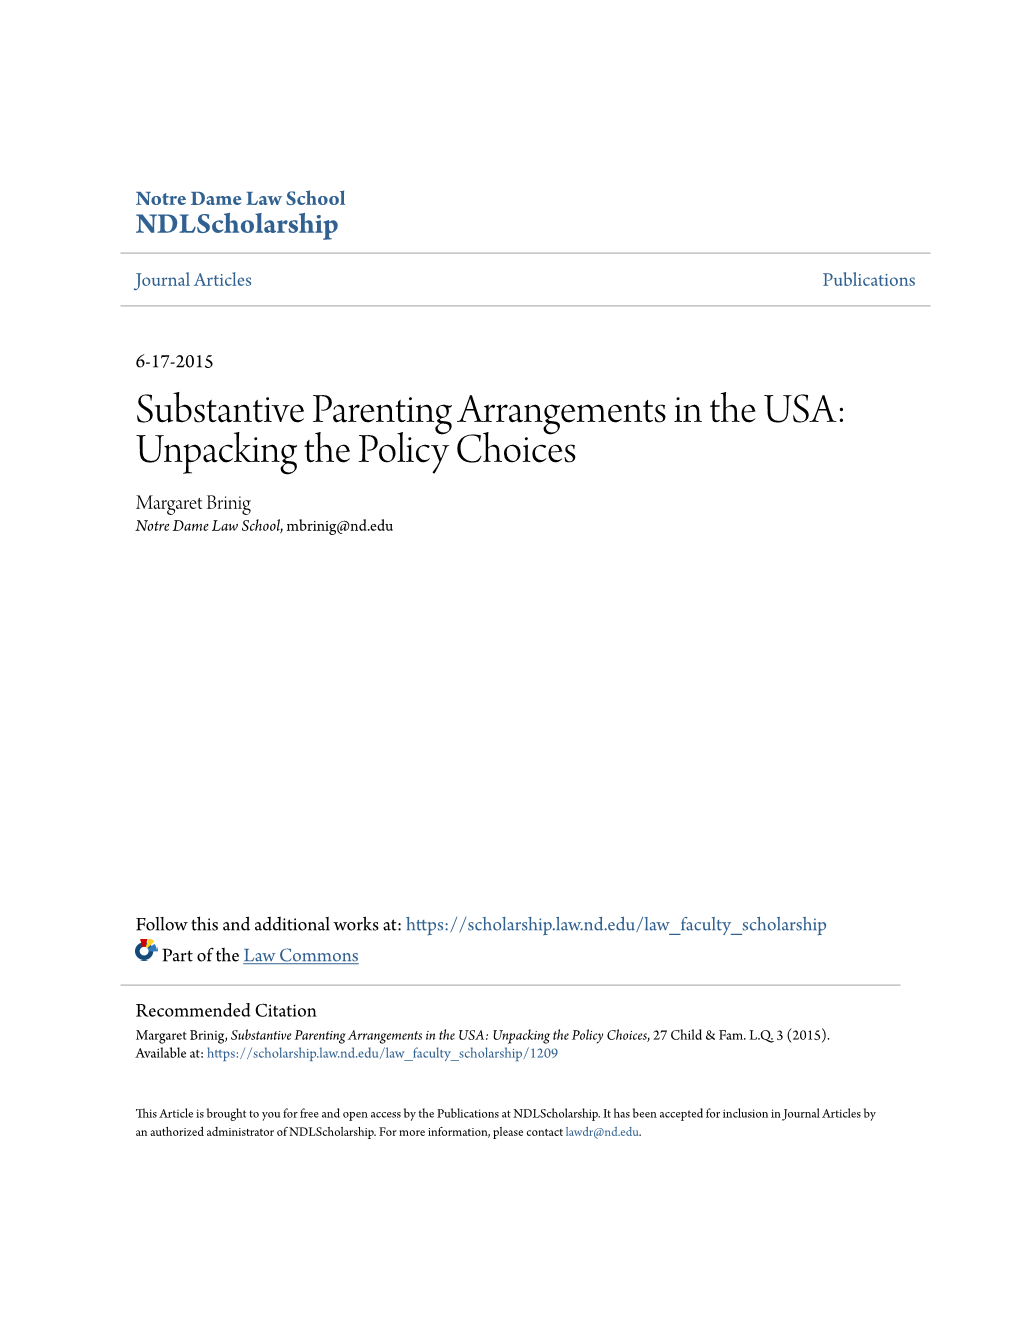 Substantive Parenting Arrangements in the USA: Unpacking the Policy Choices Margaret Brinig Notre Dame Law School, Mbrinig@Nd.Edu